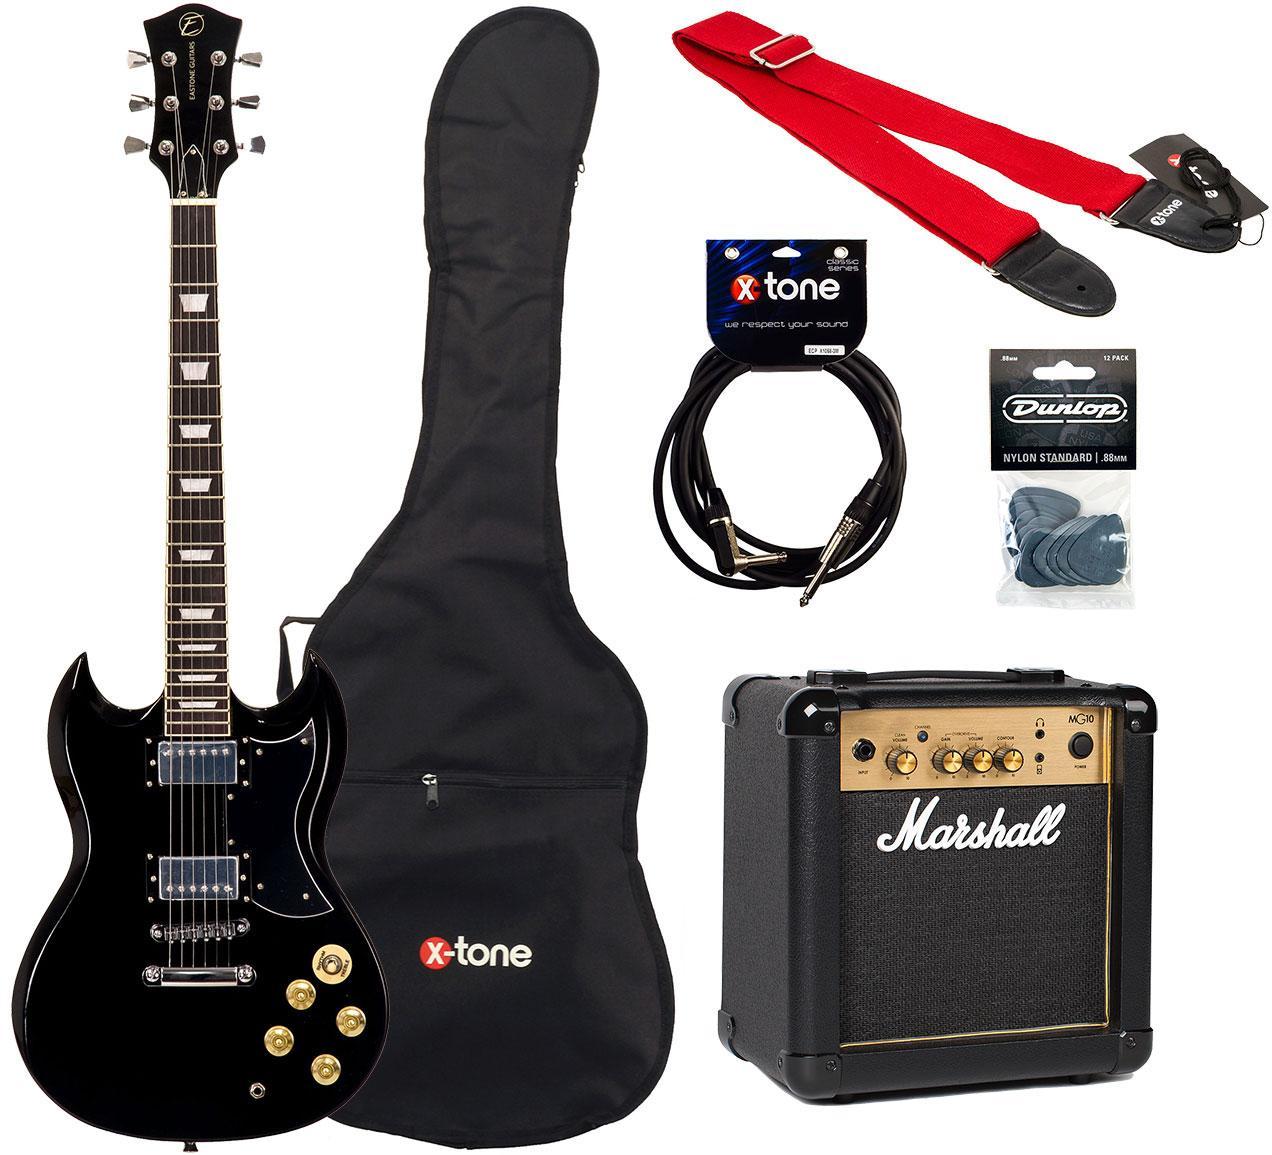 Pack guitare électrique Eastone SDC70 +Marshall MG10G Gold +Accessoires - Red